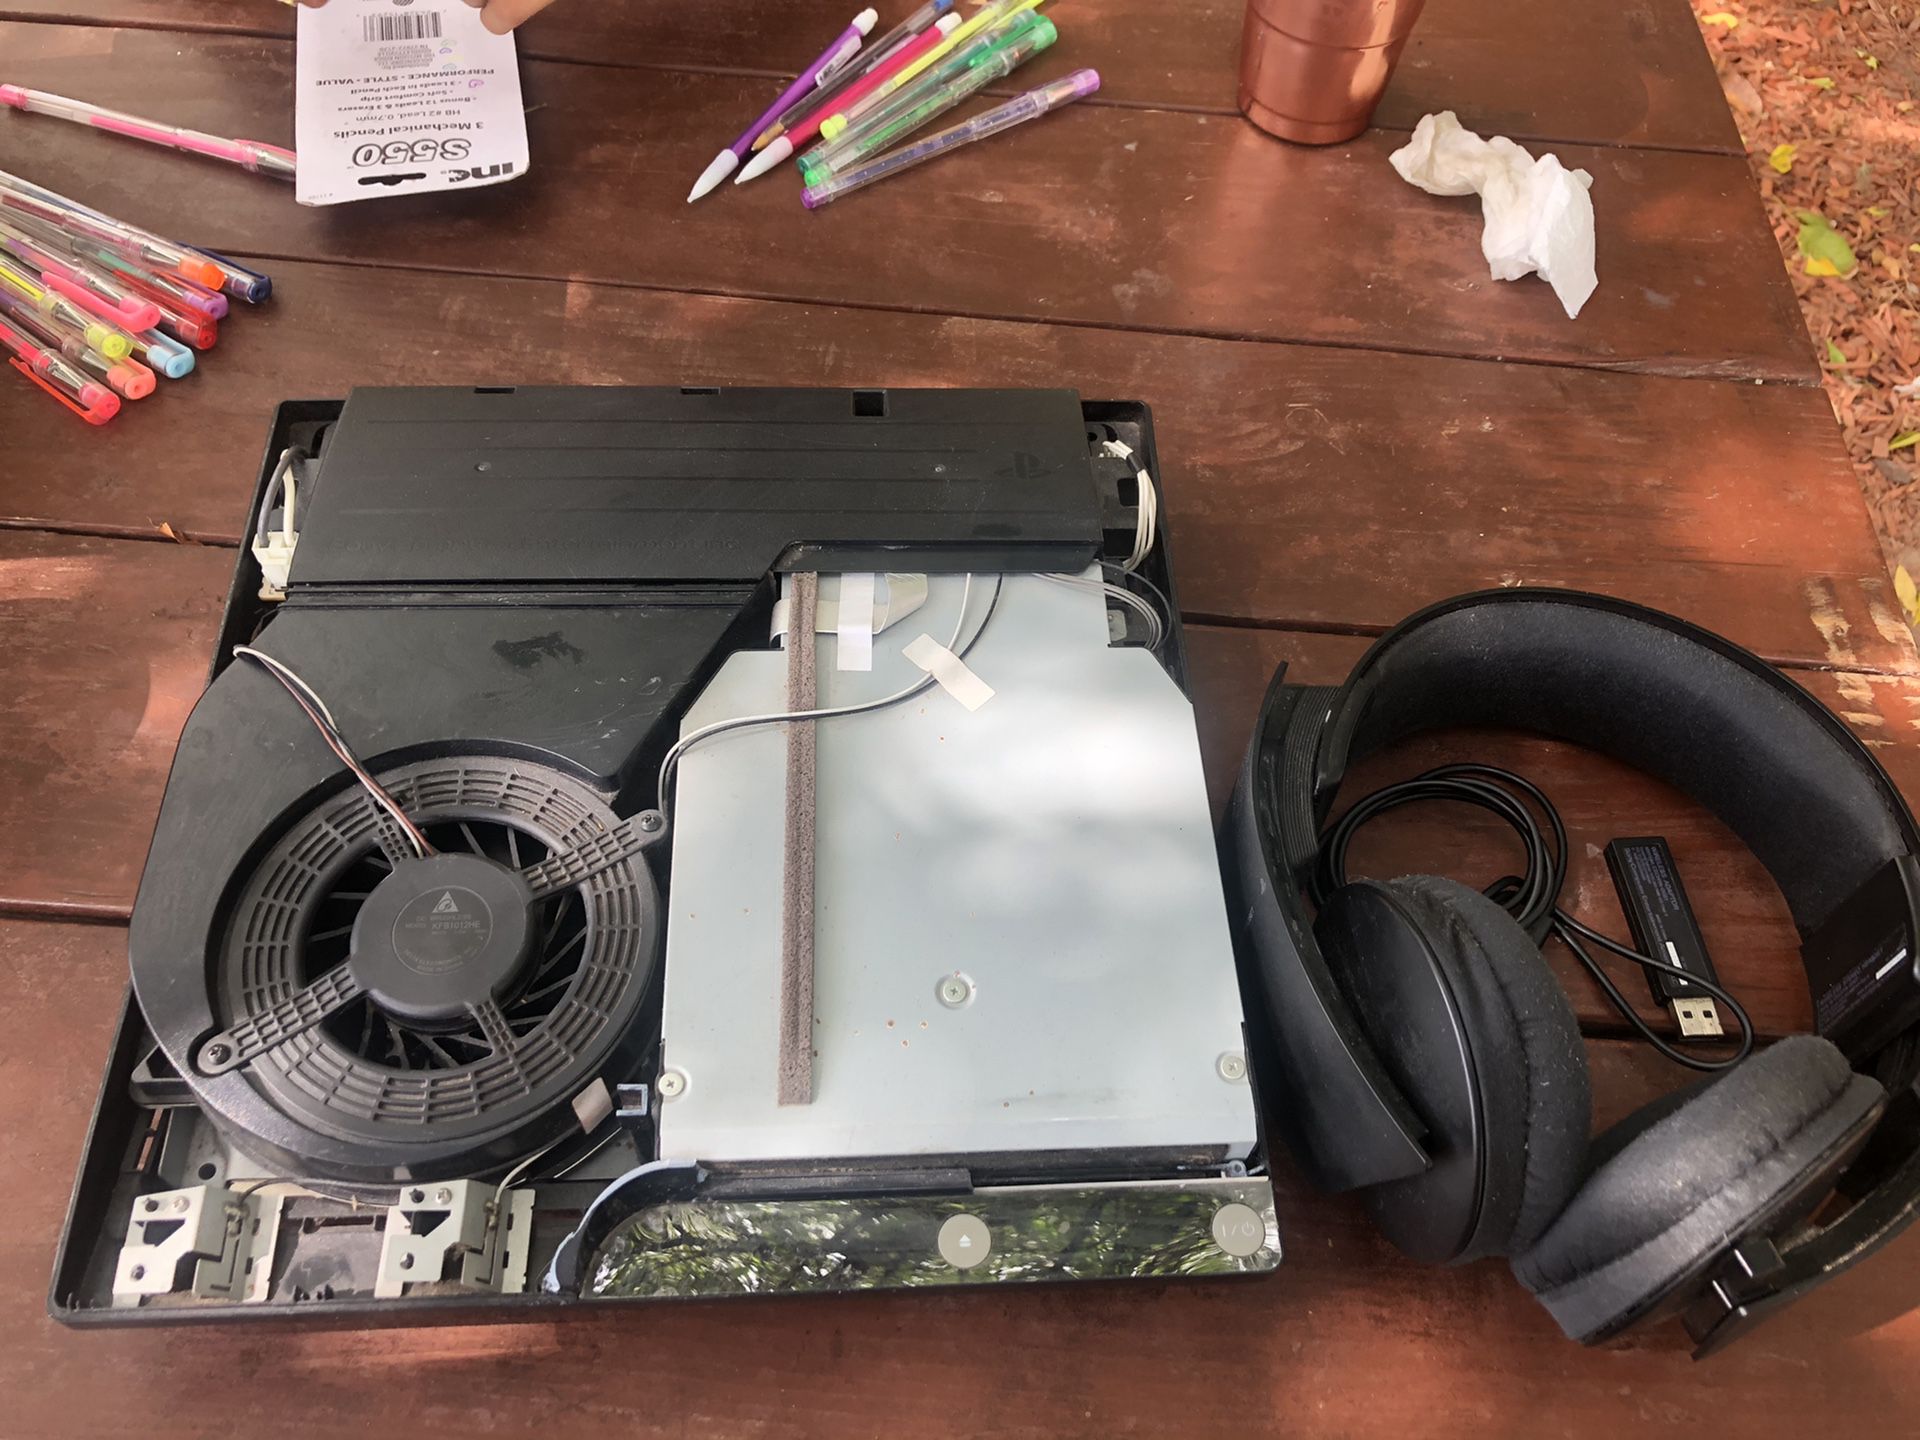 Ps3 for parts and headphones